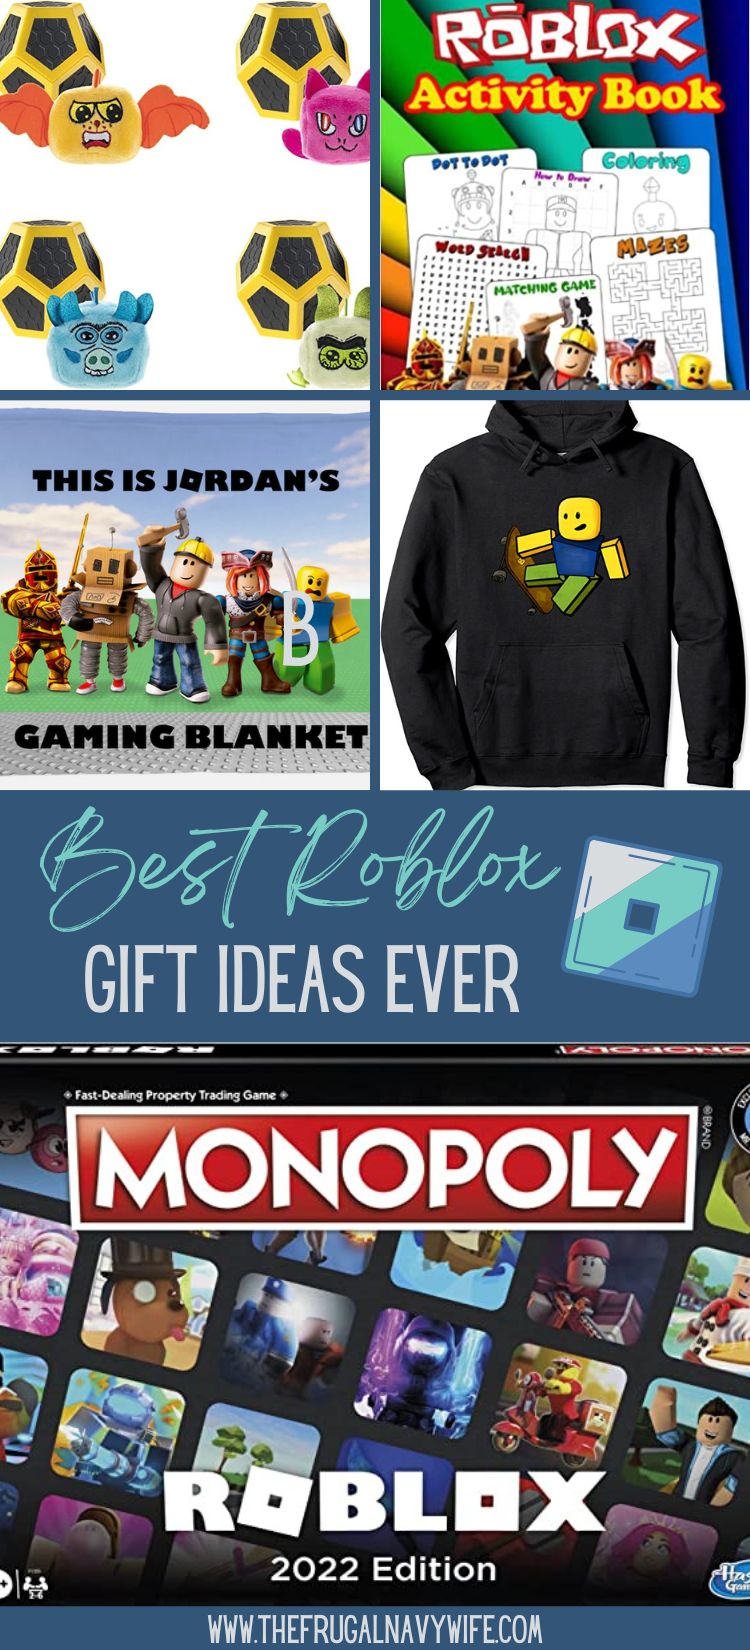 The Best Roblox Gift Ideas For Christmas 2021 - GameSpot